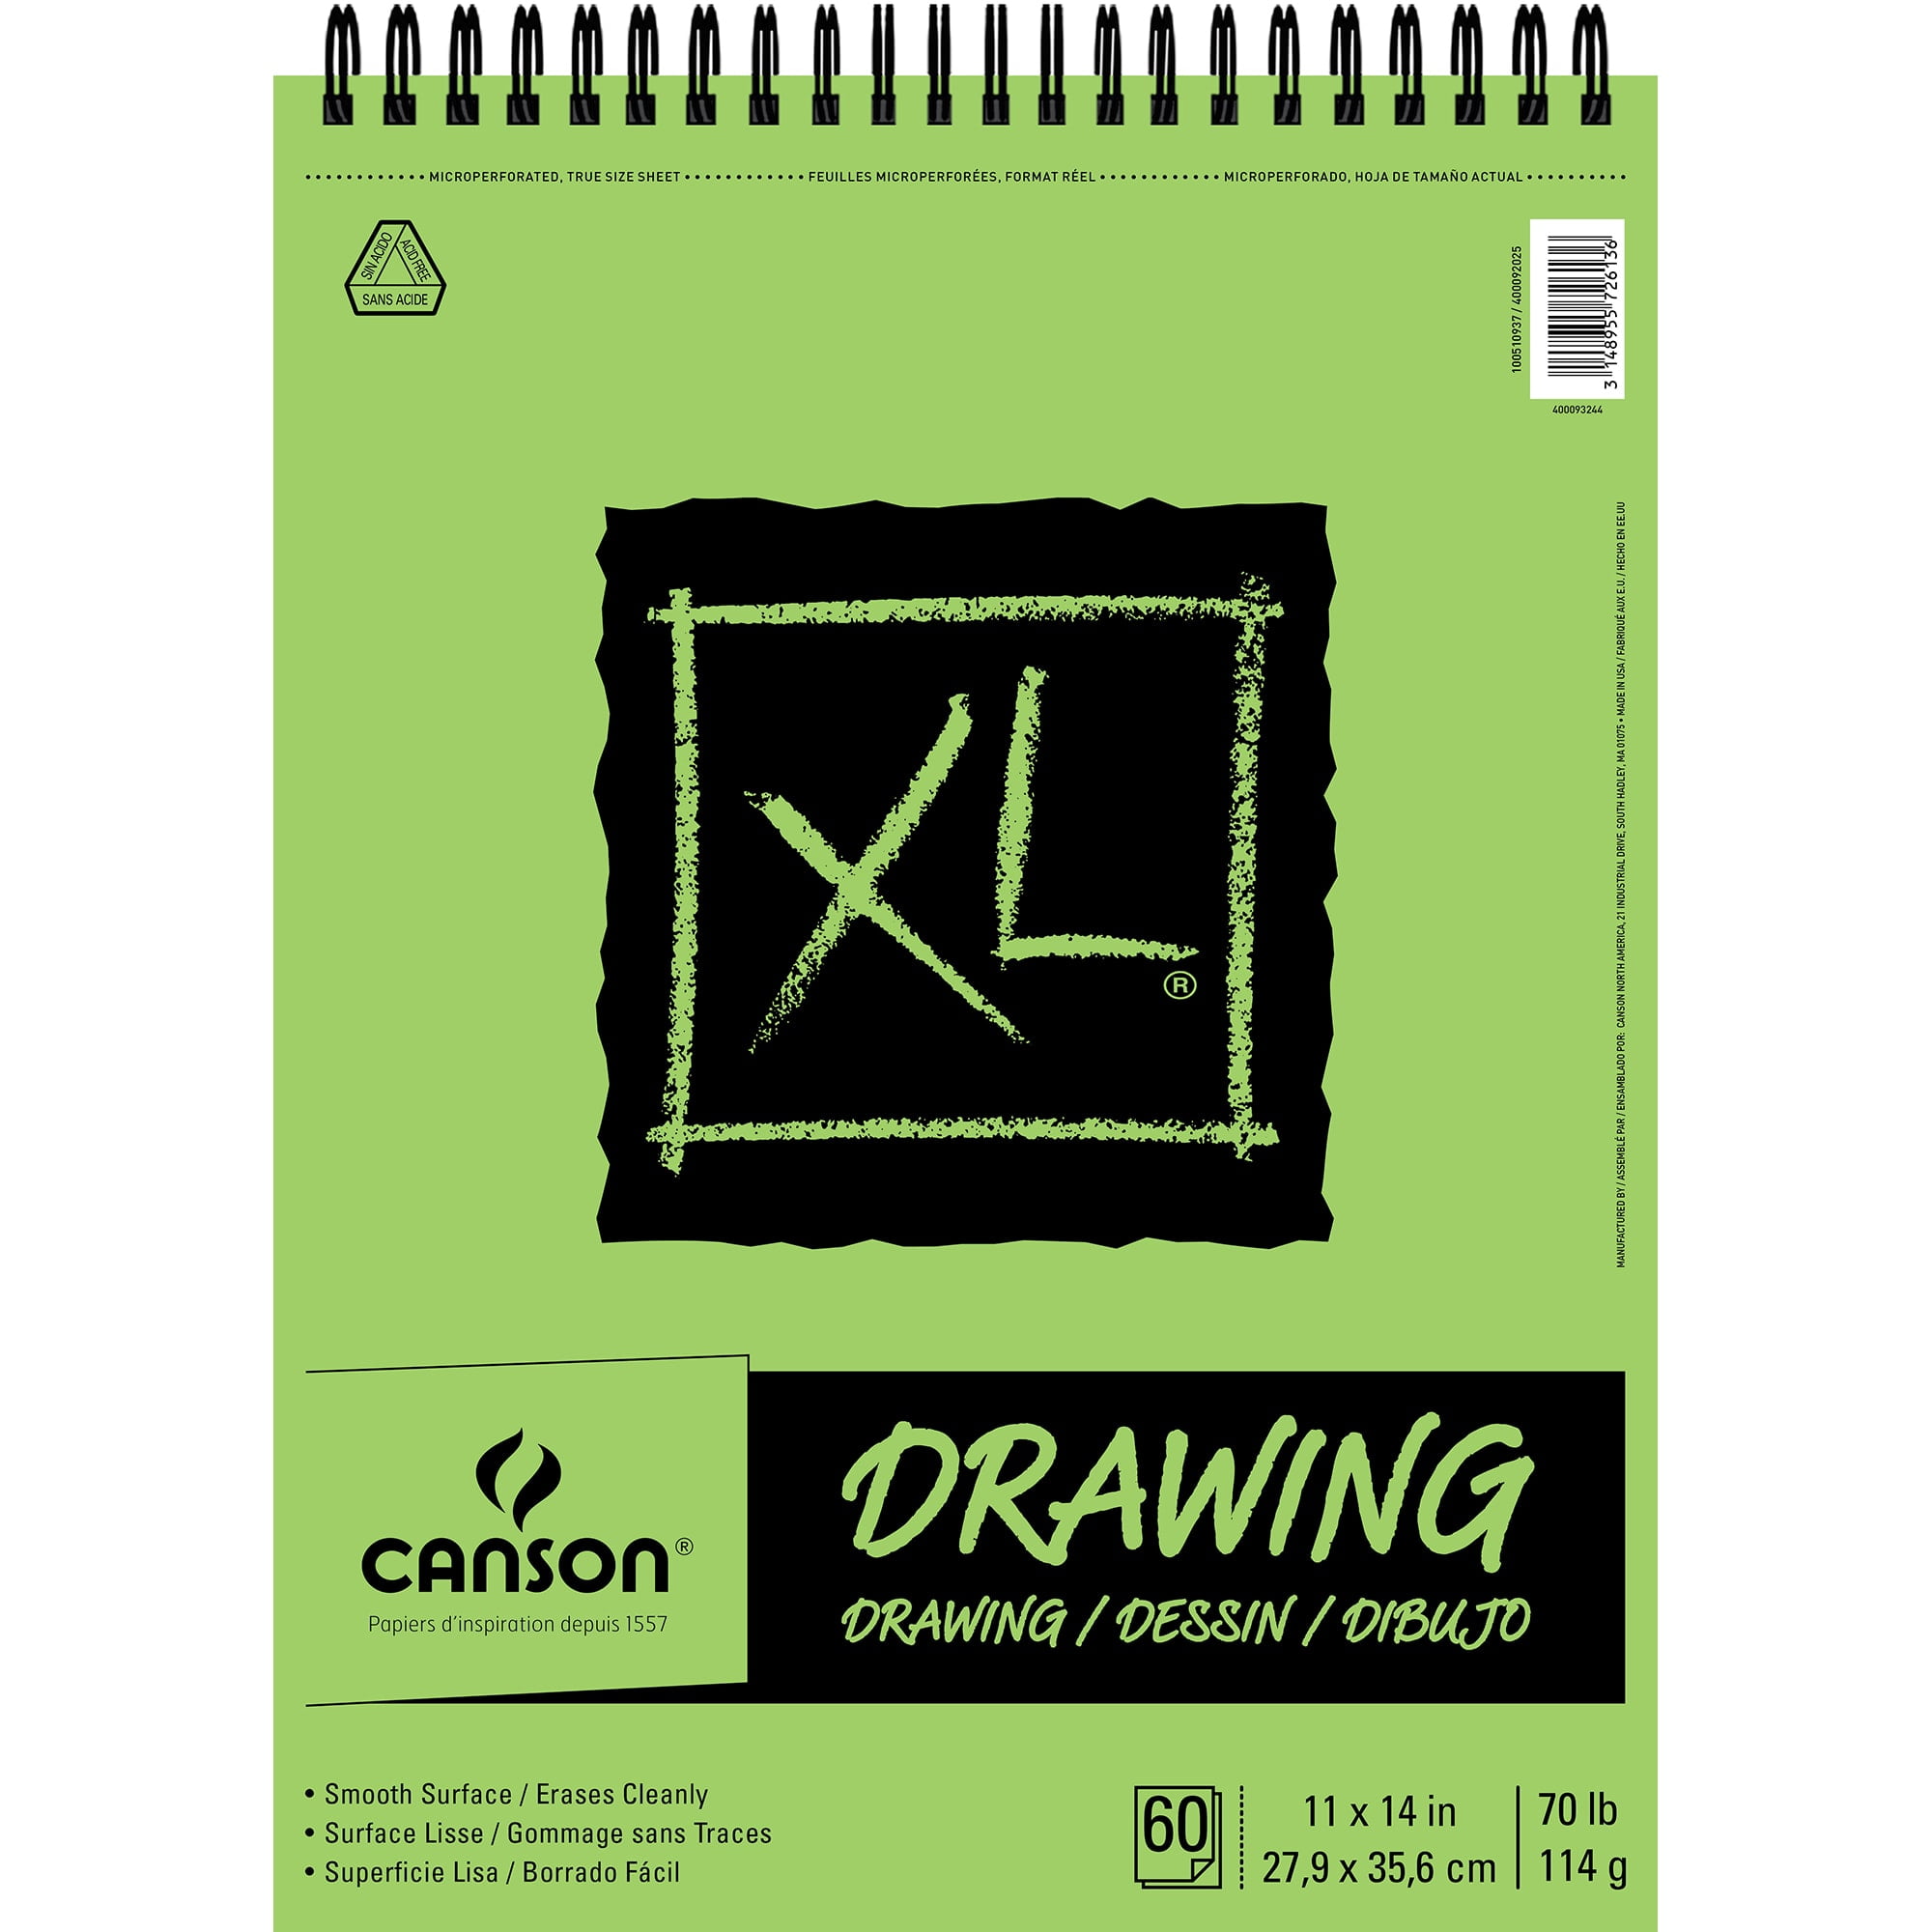 Canson XL Series Bristol Paper, Smooth, Foldover Pad, 9x12 inches, 25  Sheets (100lb/260g) - Artist Paper for Adults and Students - Markers, Pen  and Ink : Arts, Crafts & Sewing 